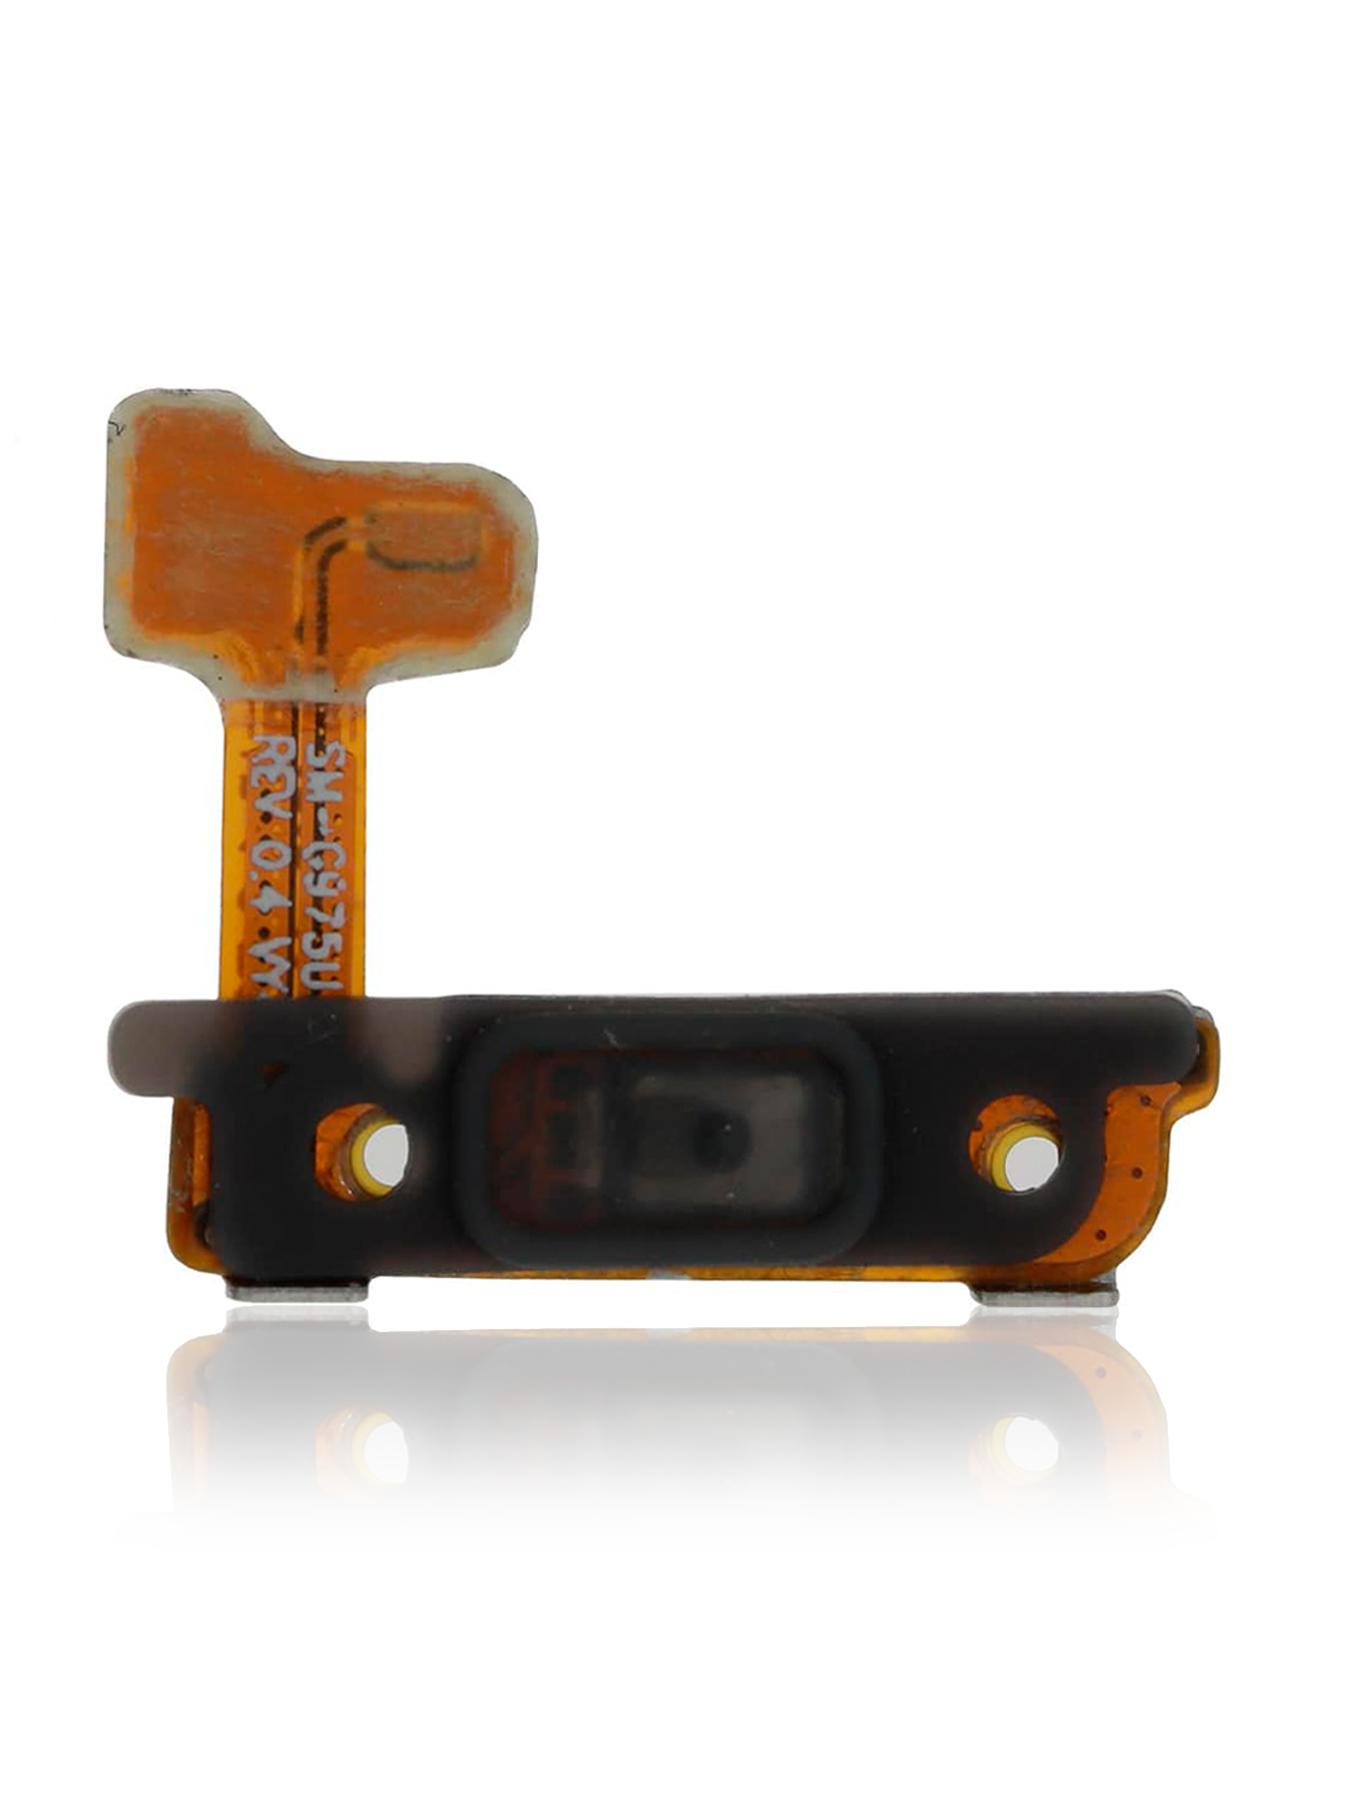 For Samsung Galaxy S10 / S10 Plus Power Button Flex Cable Replacement